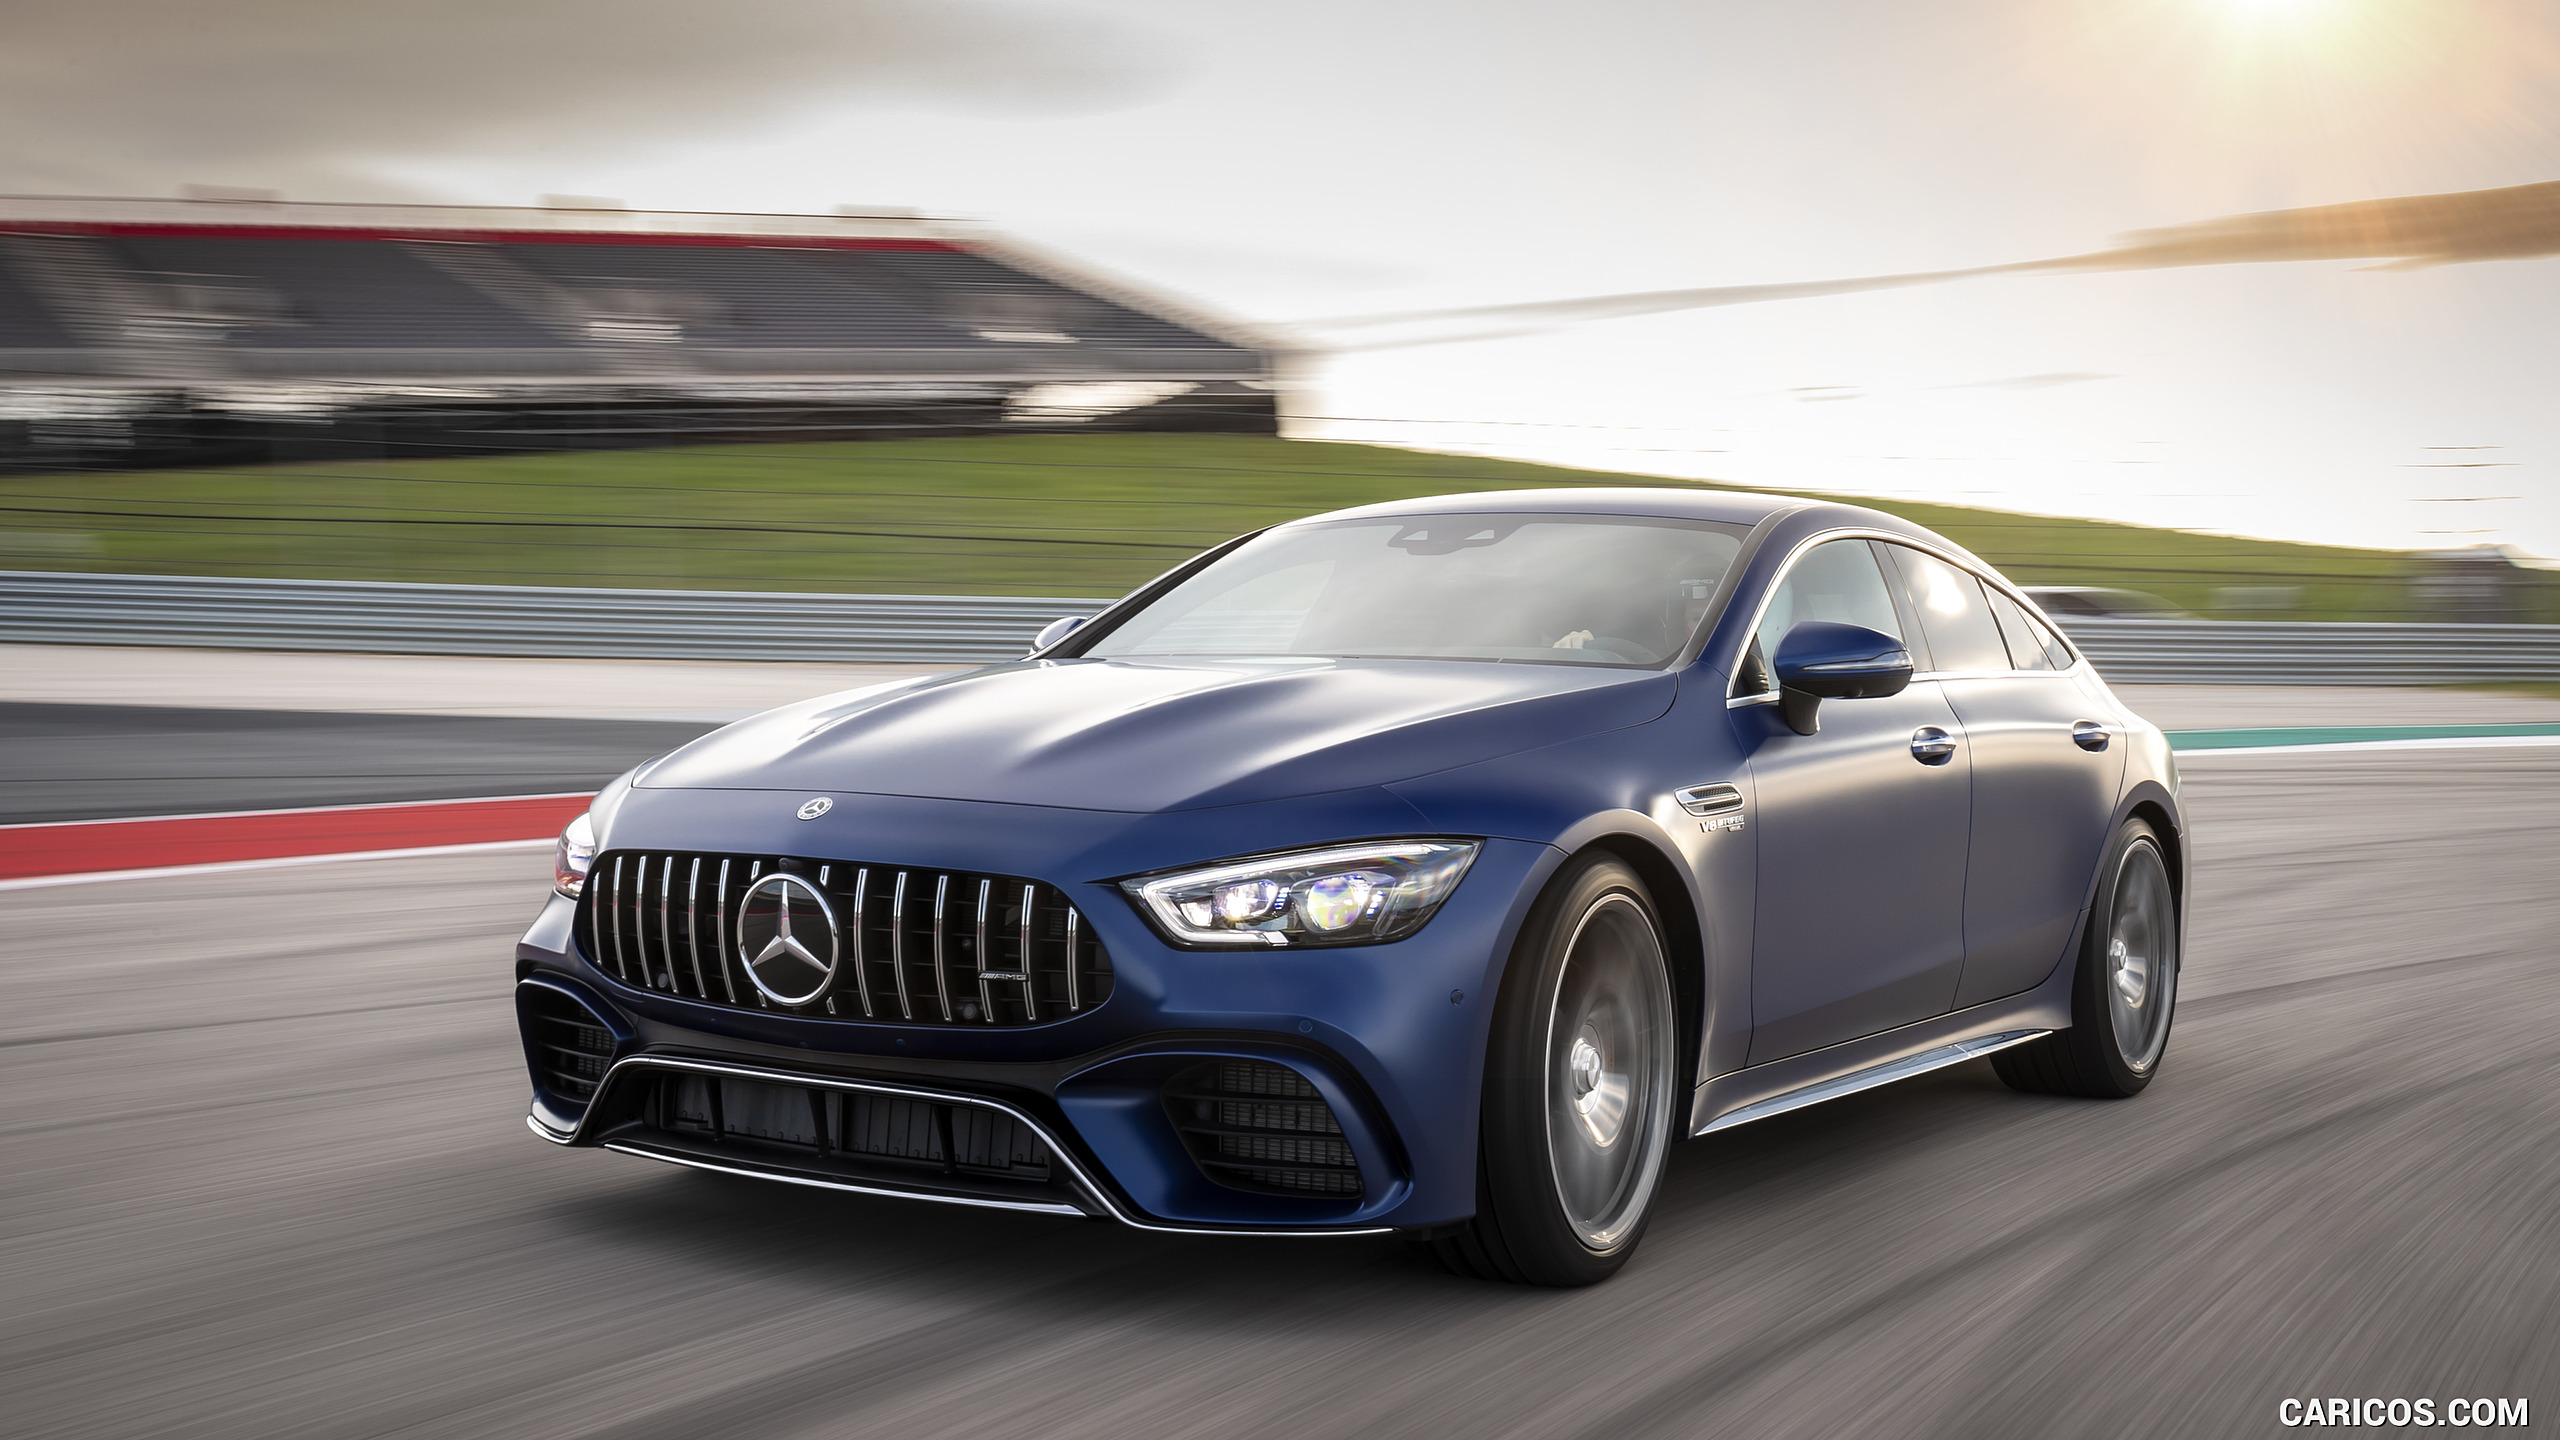 2019 Mercedes-AMG GT 63 S 4MATIC+ 4-Door Coupe - Front Three-Quarter, #98 of 427